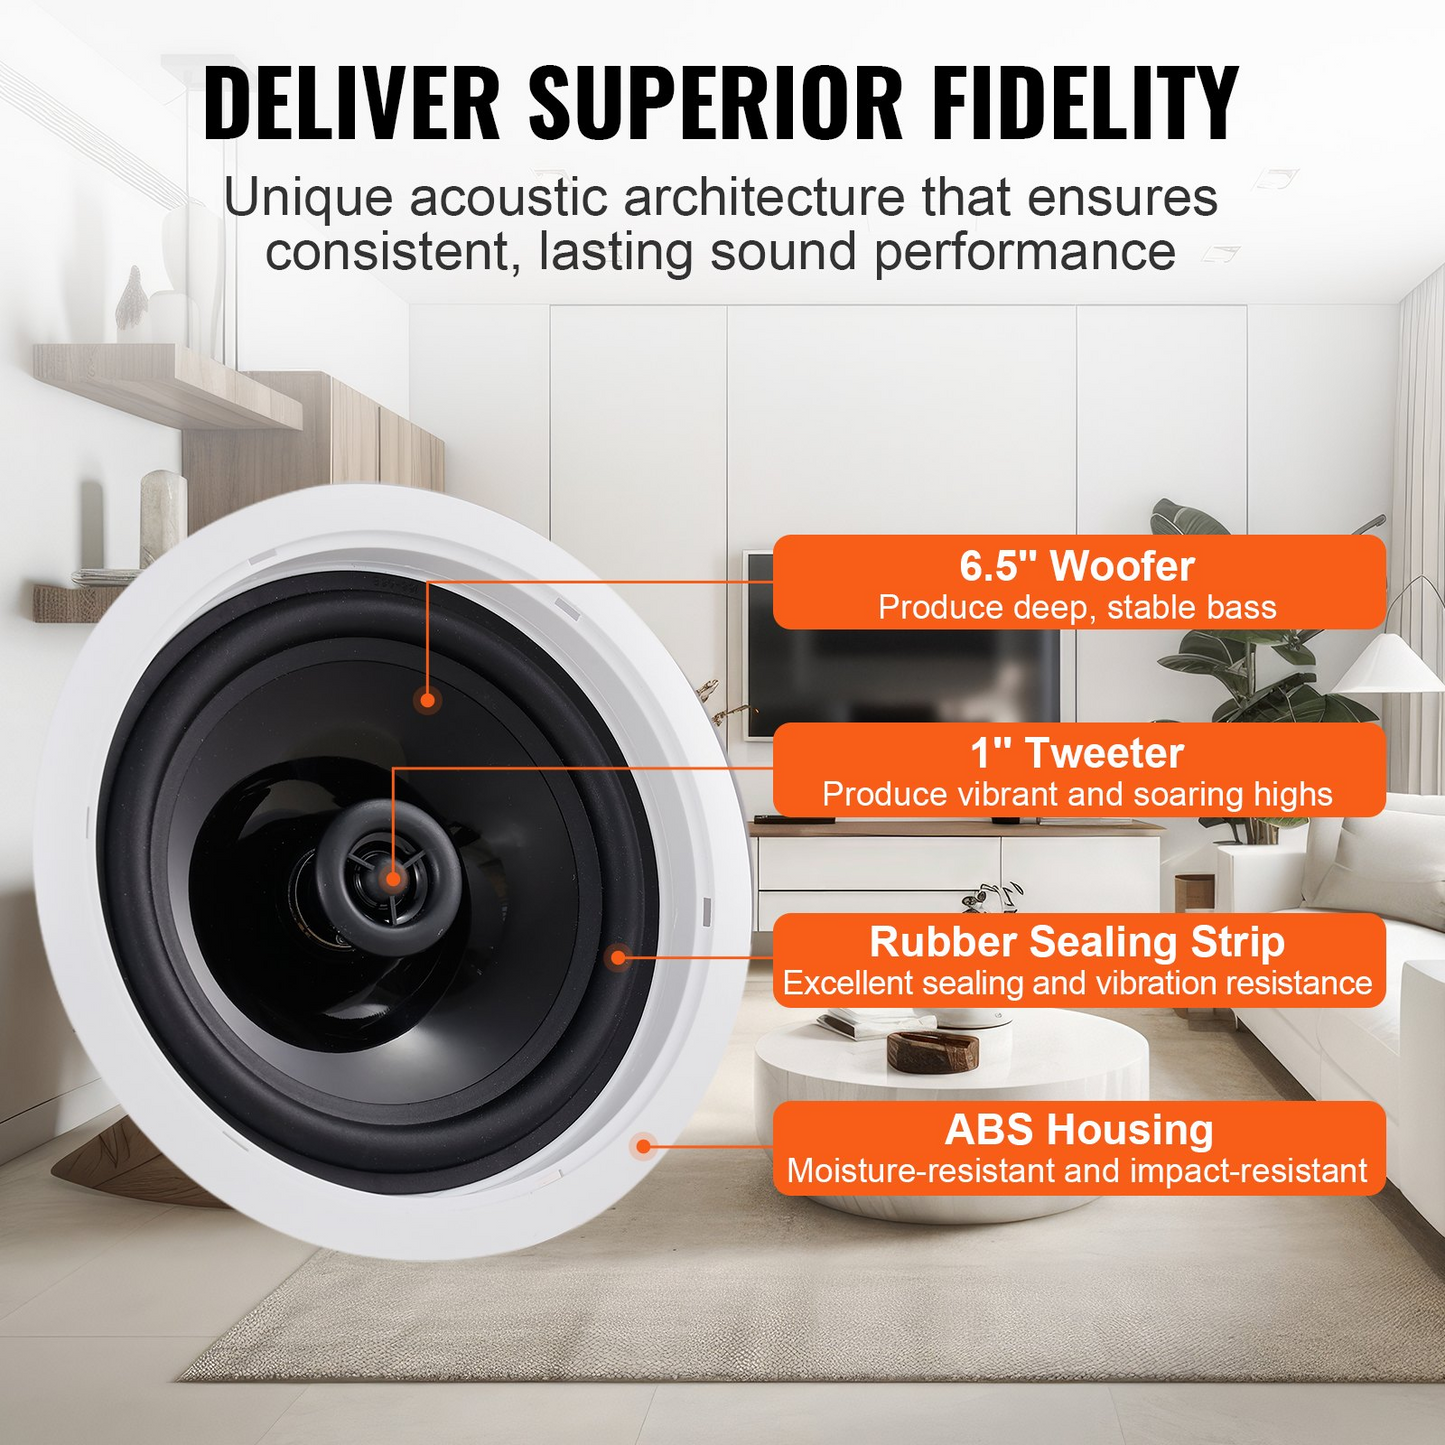 VEVOR 6.5'' Bluetooth in Ceiling Speakers, 150W, Flush Mount Ceiling & in-Wall Speaker System with 8ΩImpedance 89dB Sensitivity, for Home Kitchen Living Room Bedroom or Covered Outdoor Porches, Single, Goodies N Stuff